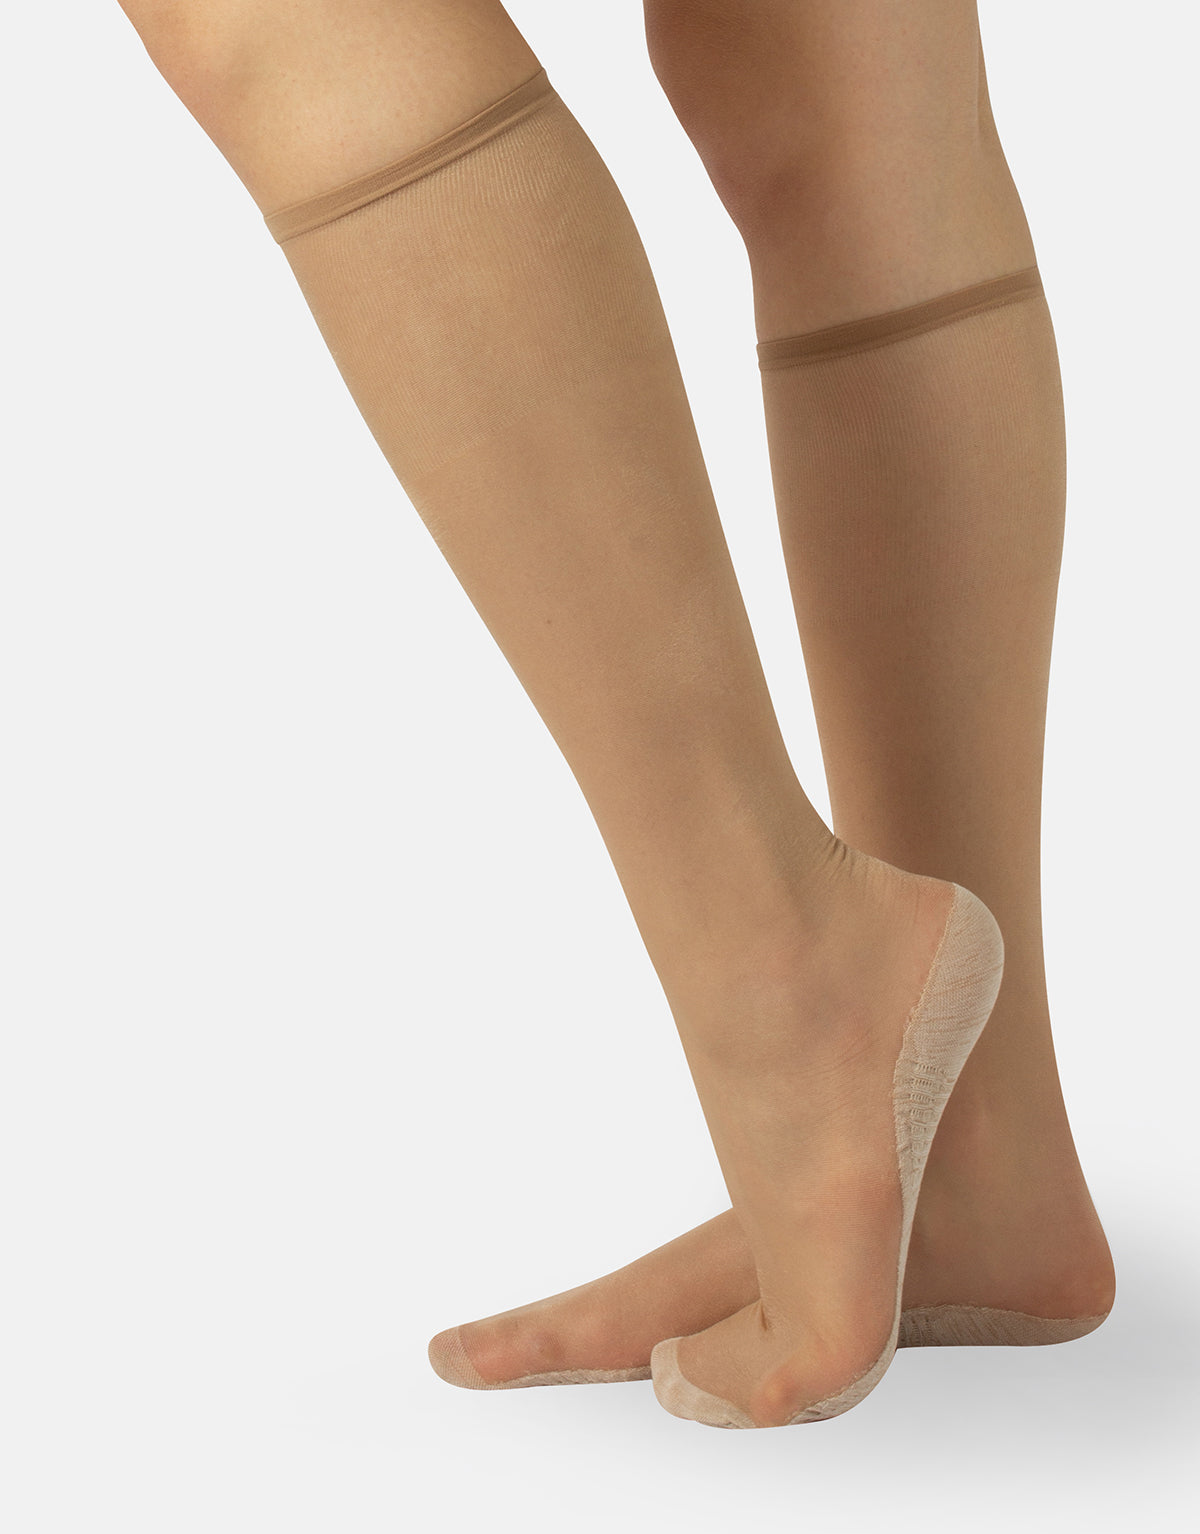 Calzitaly Cotton Massage Sole Knee-Highs - Sheer nude knee-high socks with an innovative cotton sole that massages the foot giving relief and ensuring their well-being with every type of shoes. These socks also have a deep comfort cuff and reinforced toes.